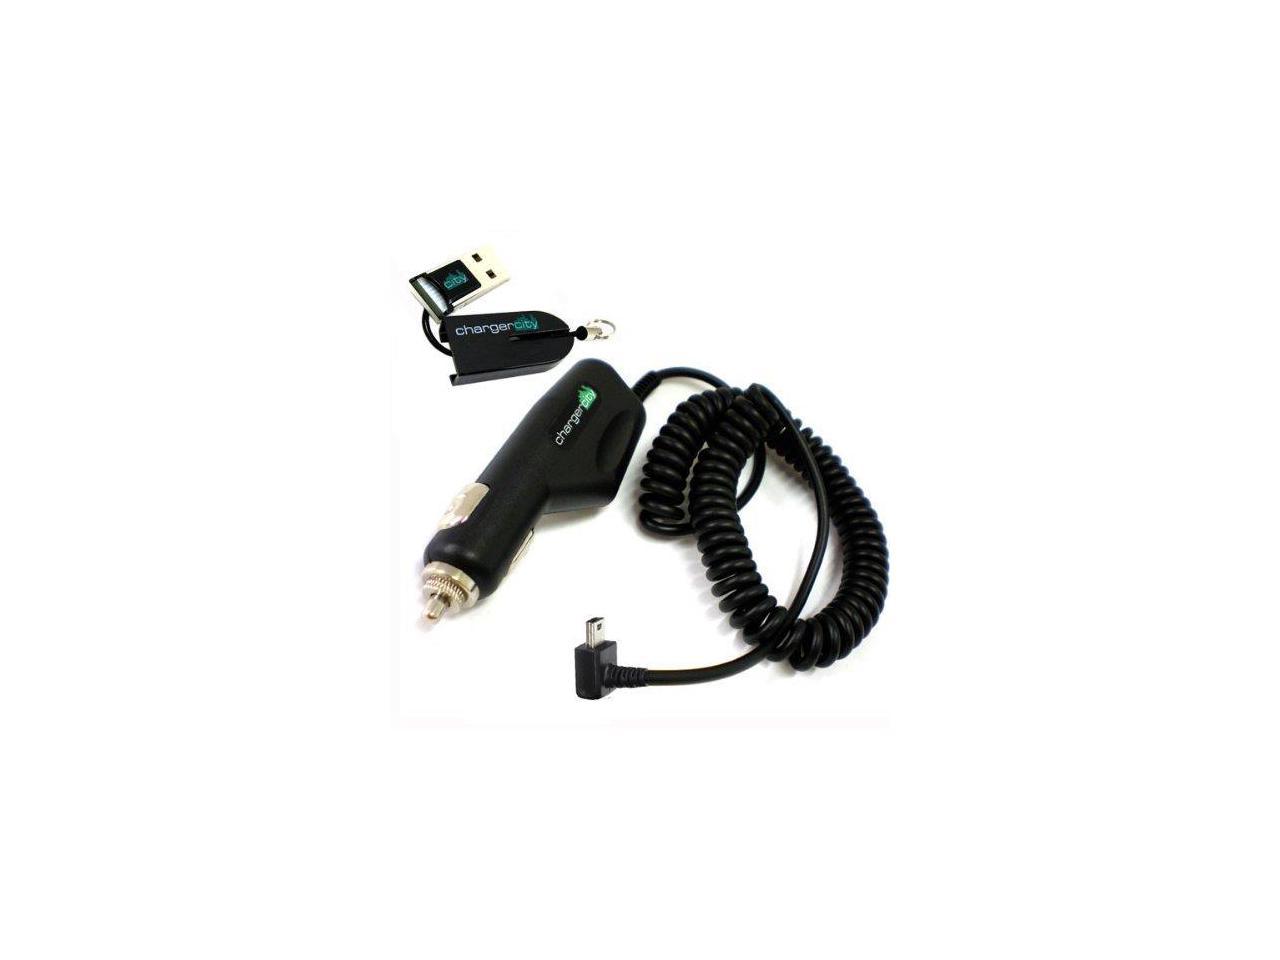 Car Charger Lead Cable For Garmin Nuvi 2497LM 2497LMT 12V 24V POWER LEAD 